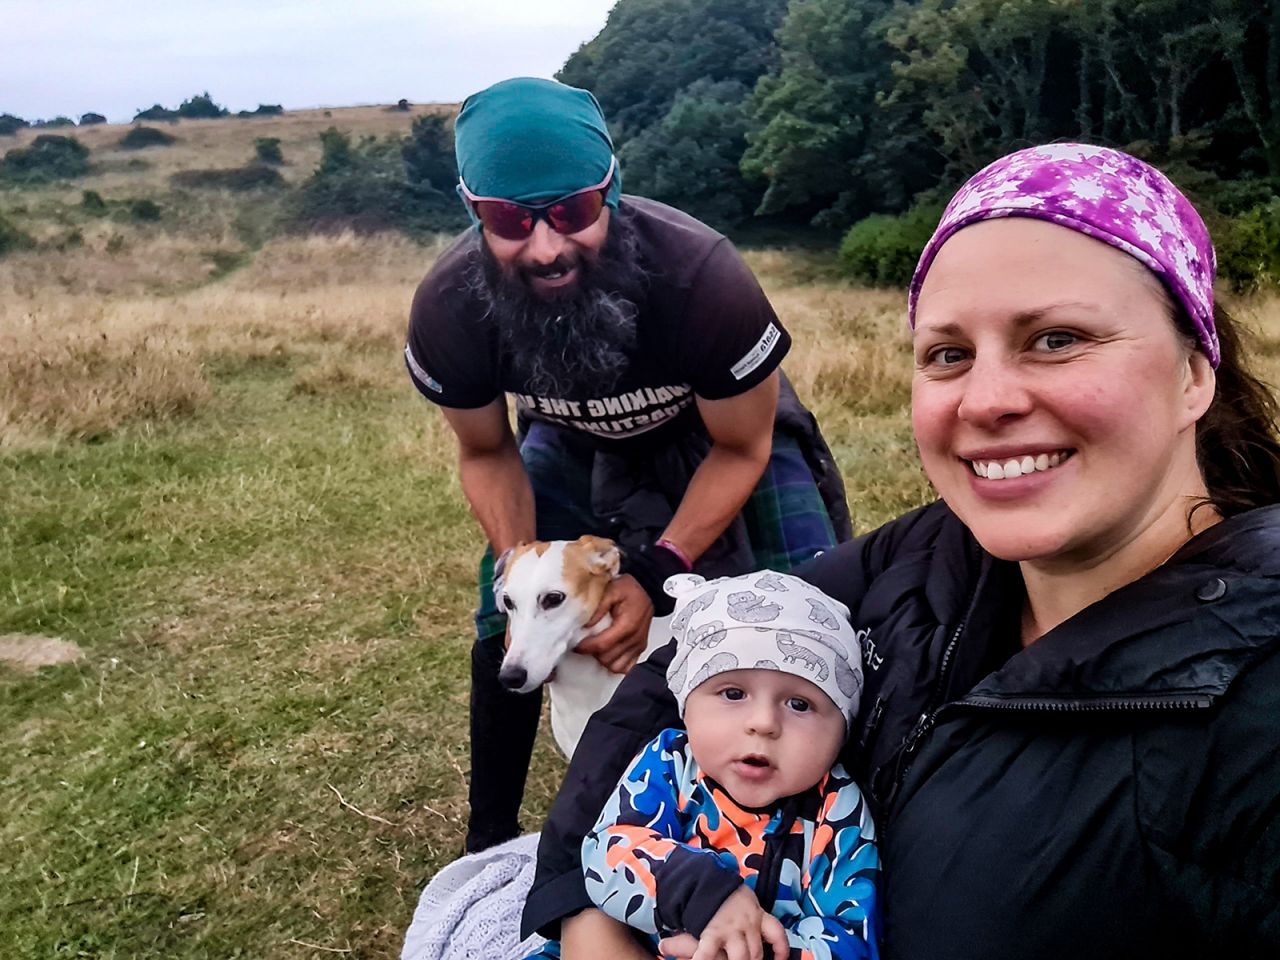 Chris Lewis met his partner, Kate Barron, while walking the UK coastline. His dog, Jet, and their son, Magnus, joined along the way.